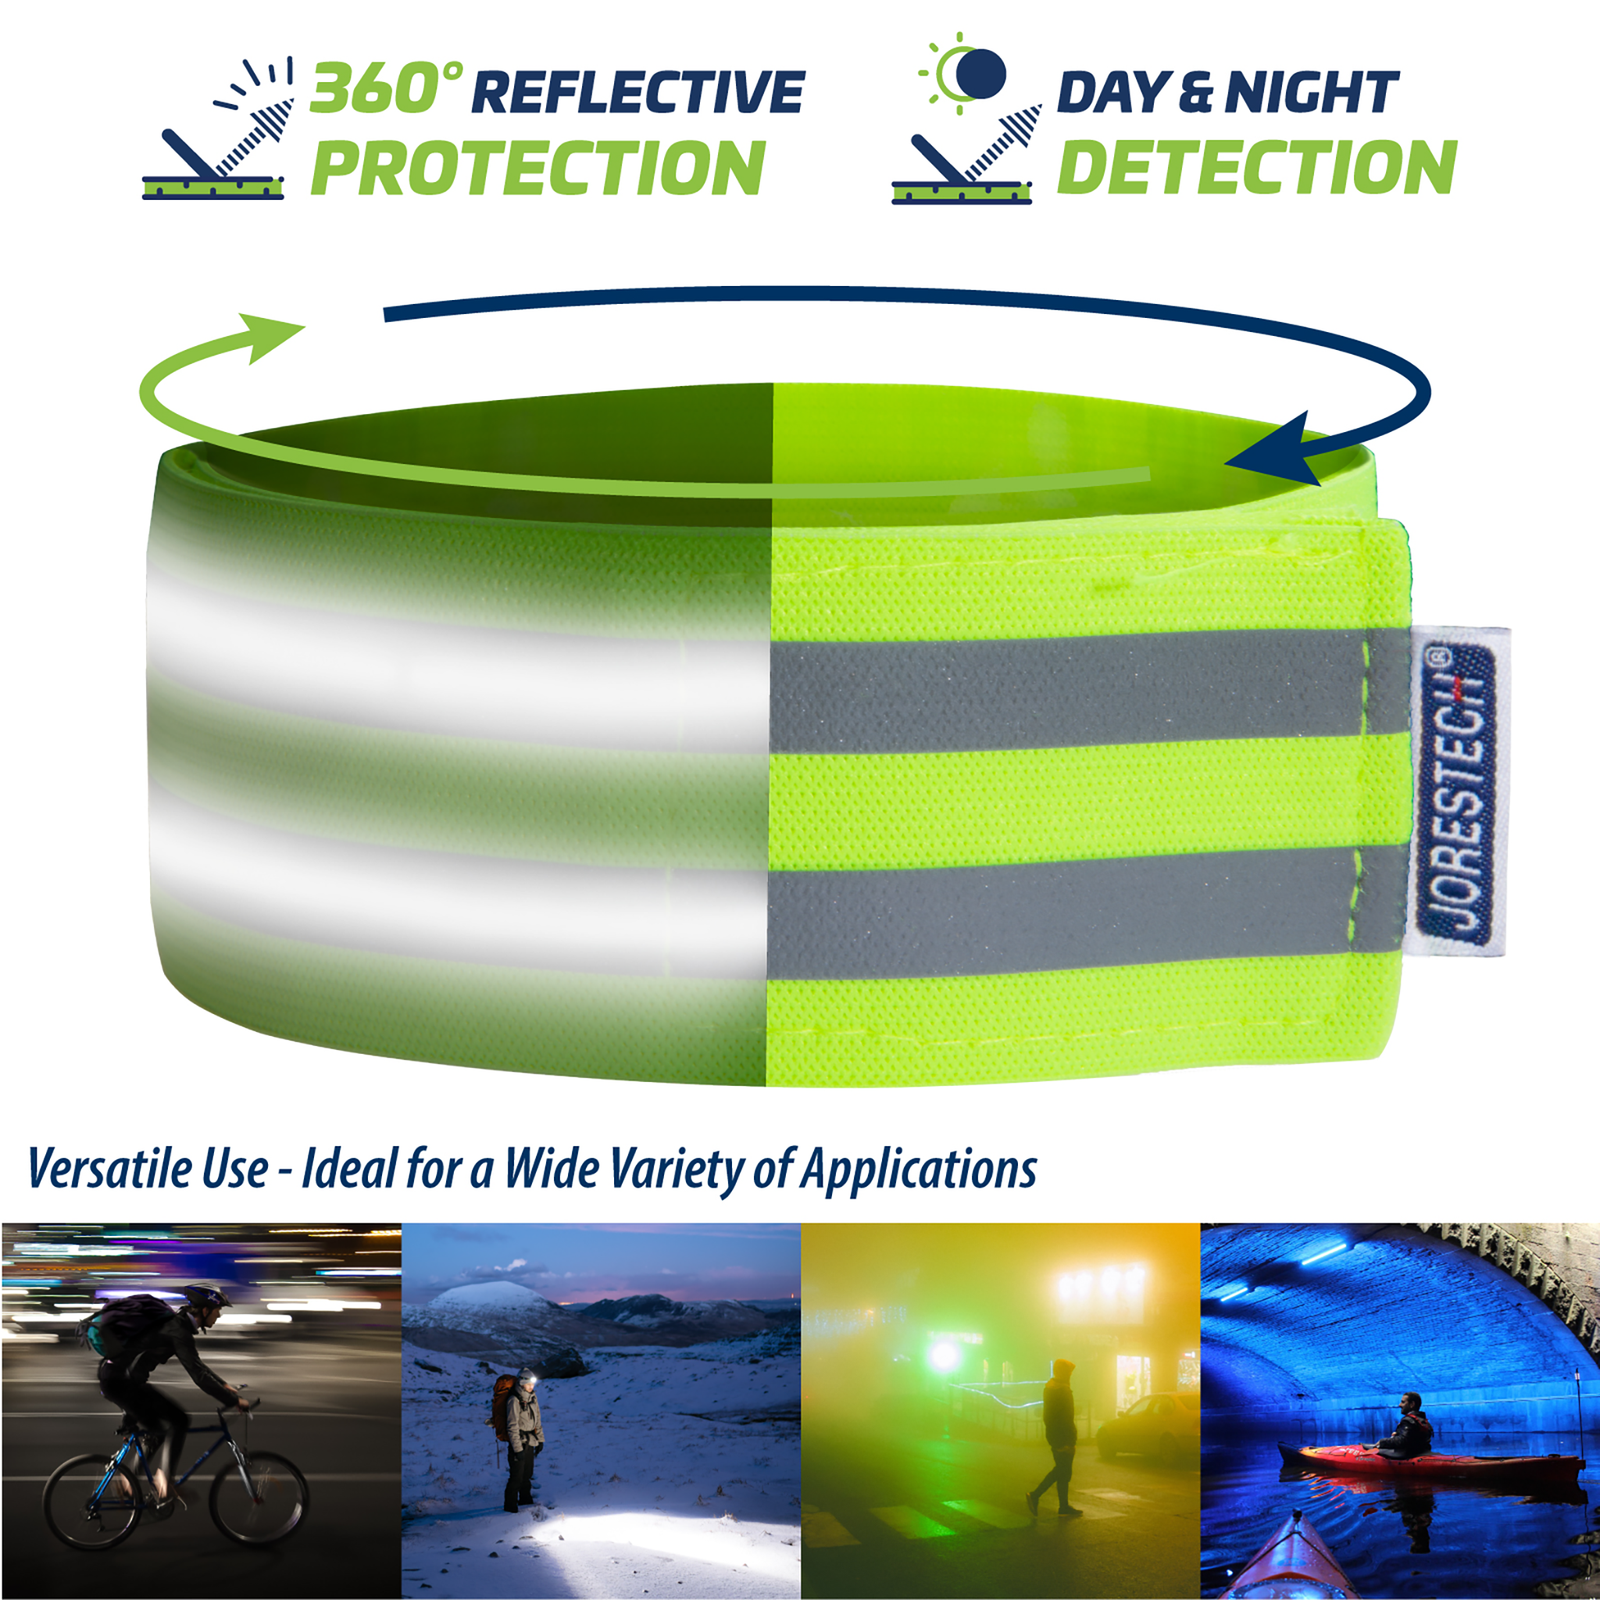 Banner compares the JORESTECH high vis reflective band's reflection during day and night time. Yellow gets brighter during day time and reflective gets more intense during night time. Text reads: versatile use, ideal for a wide variety of applications